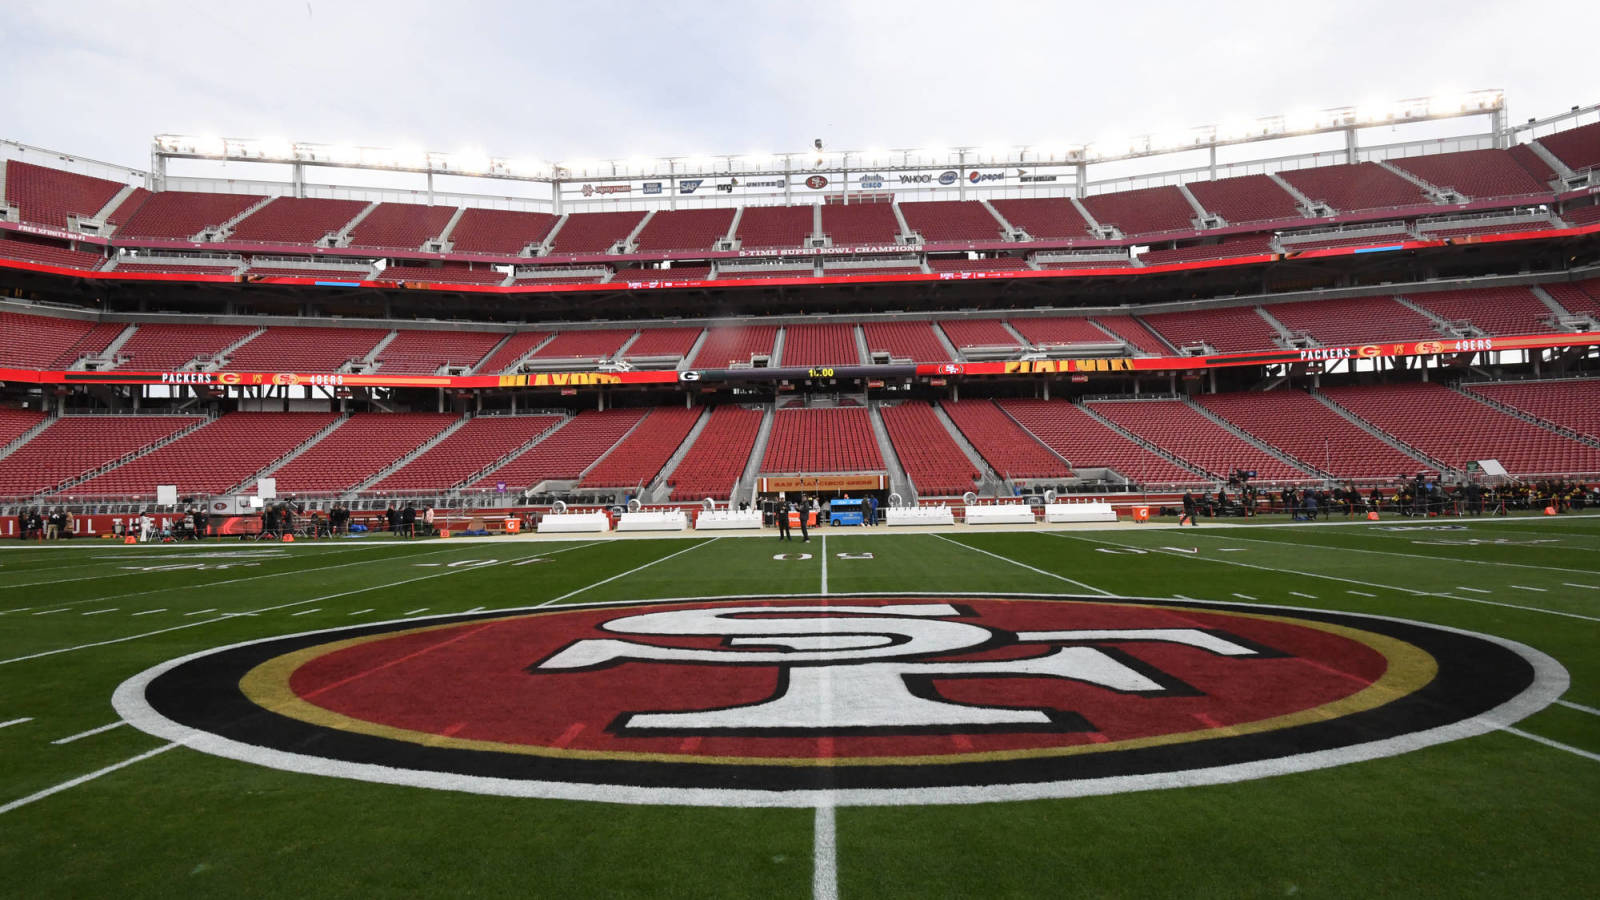 Santa Clara County prevents fans from attending 49ers games